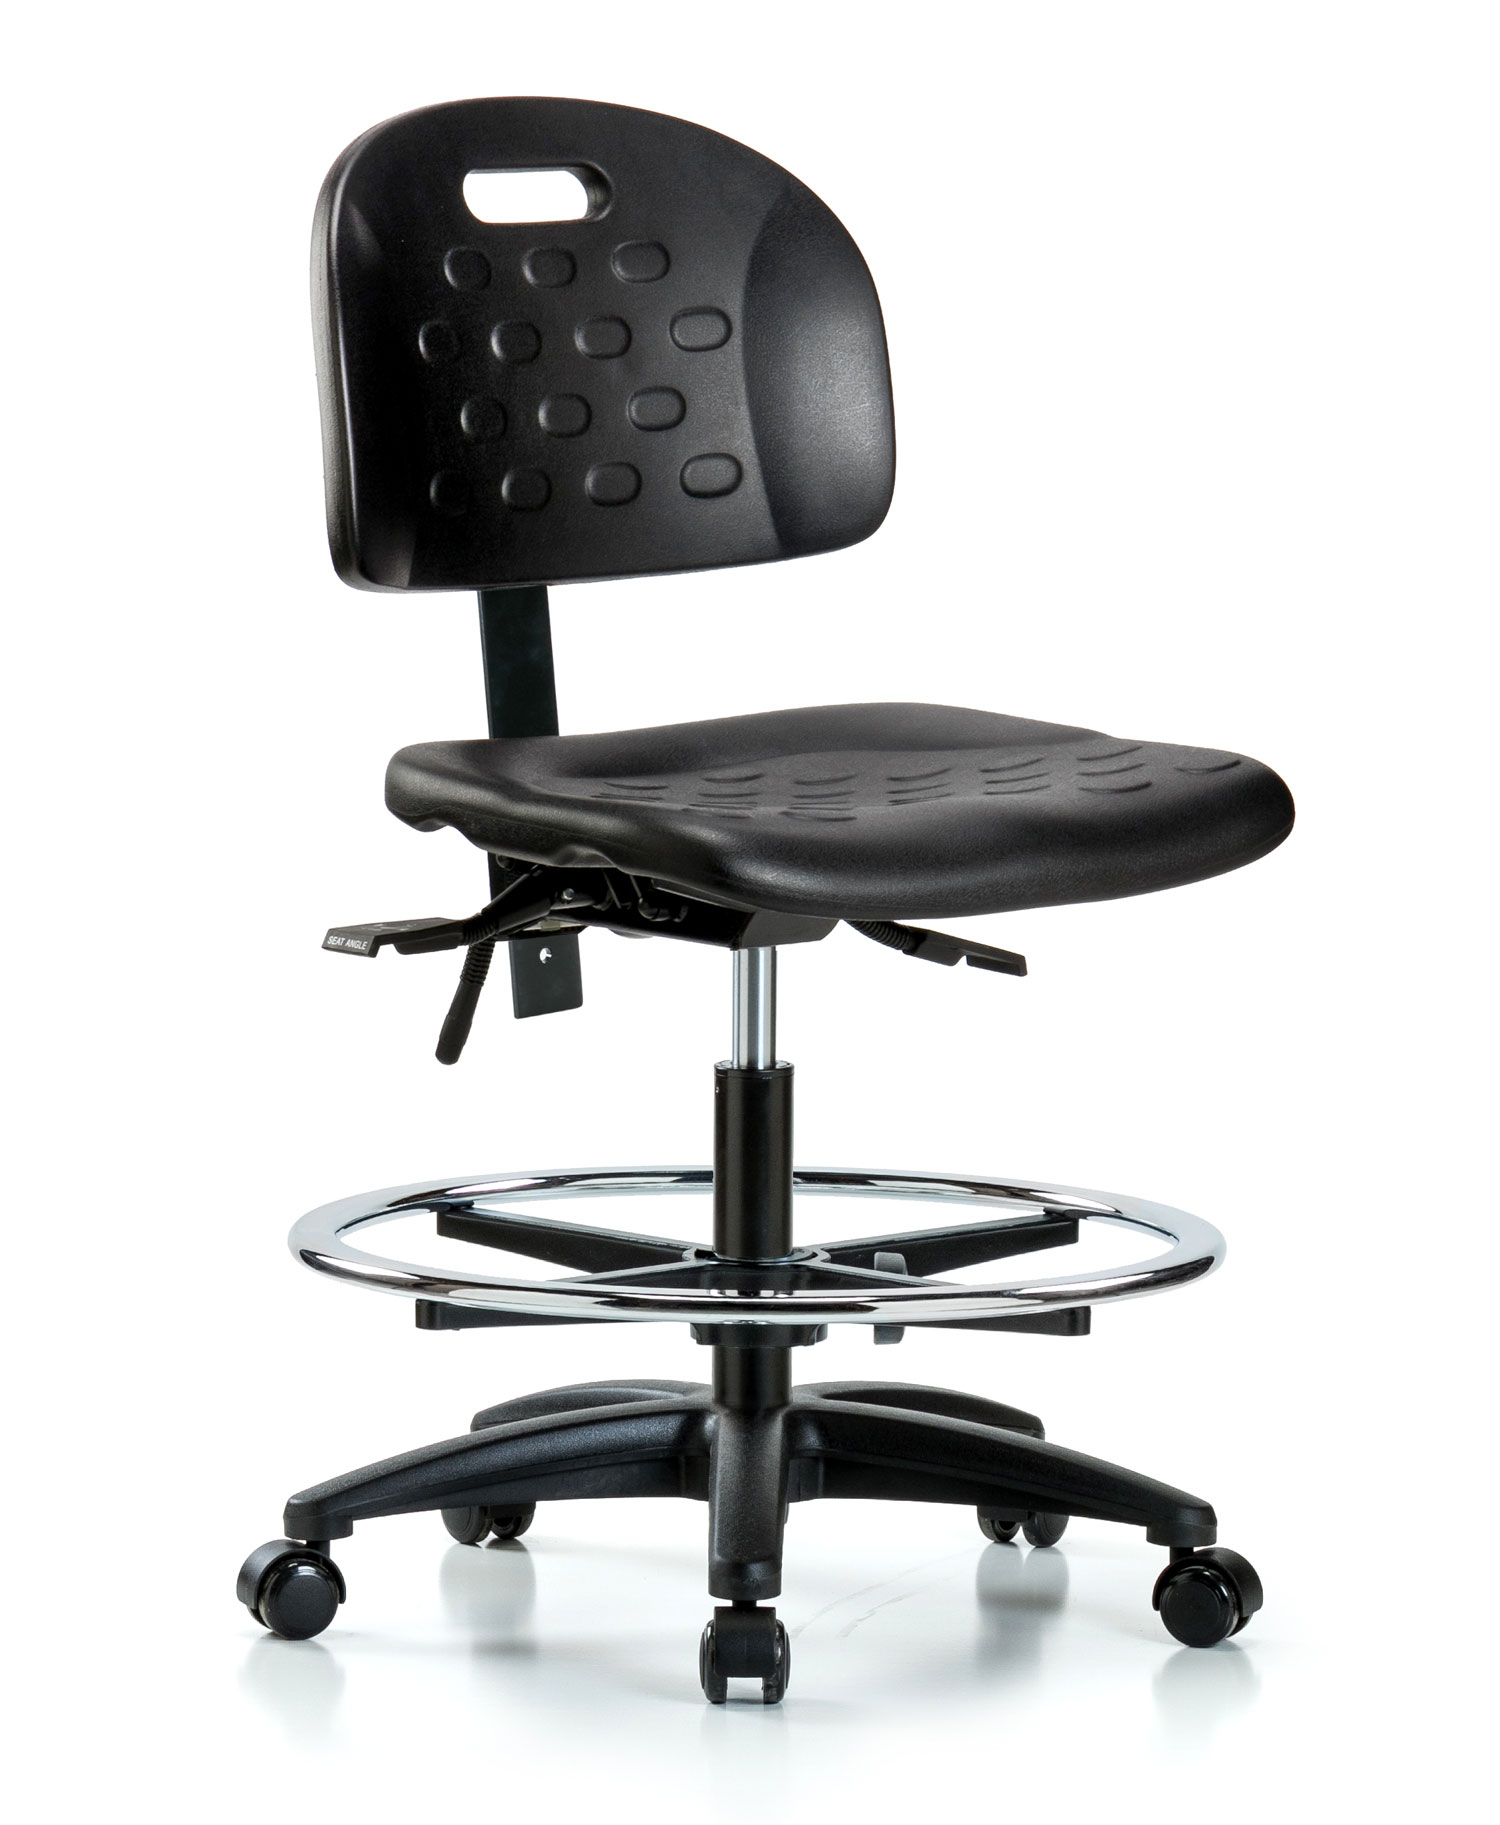 Black Polyurethane Laboratory Chair | Medium Bench Height with Seat Tilt,  Chrome Foot Ring, & Casters